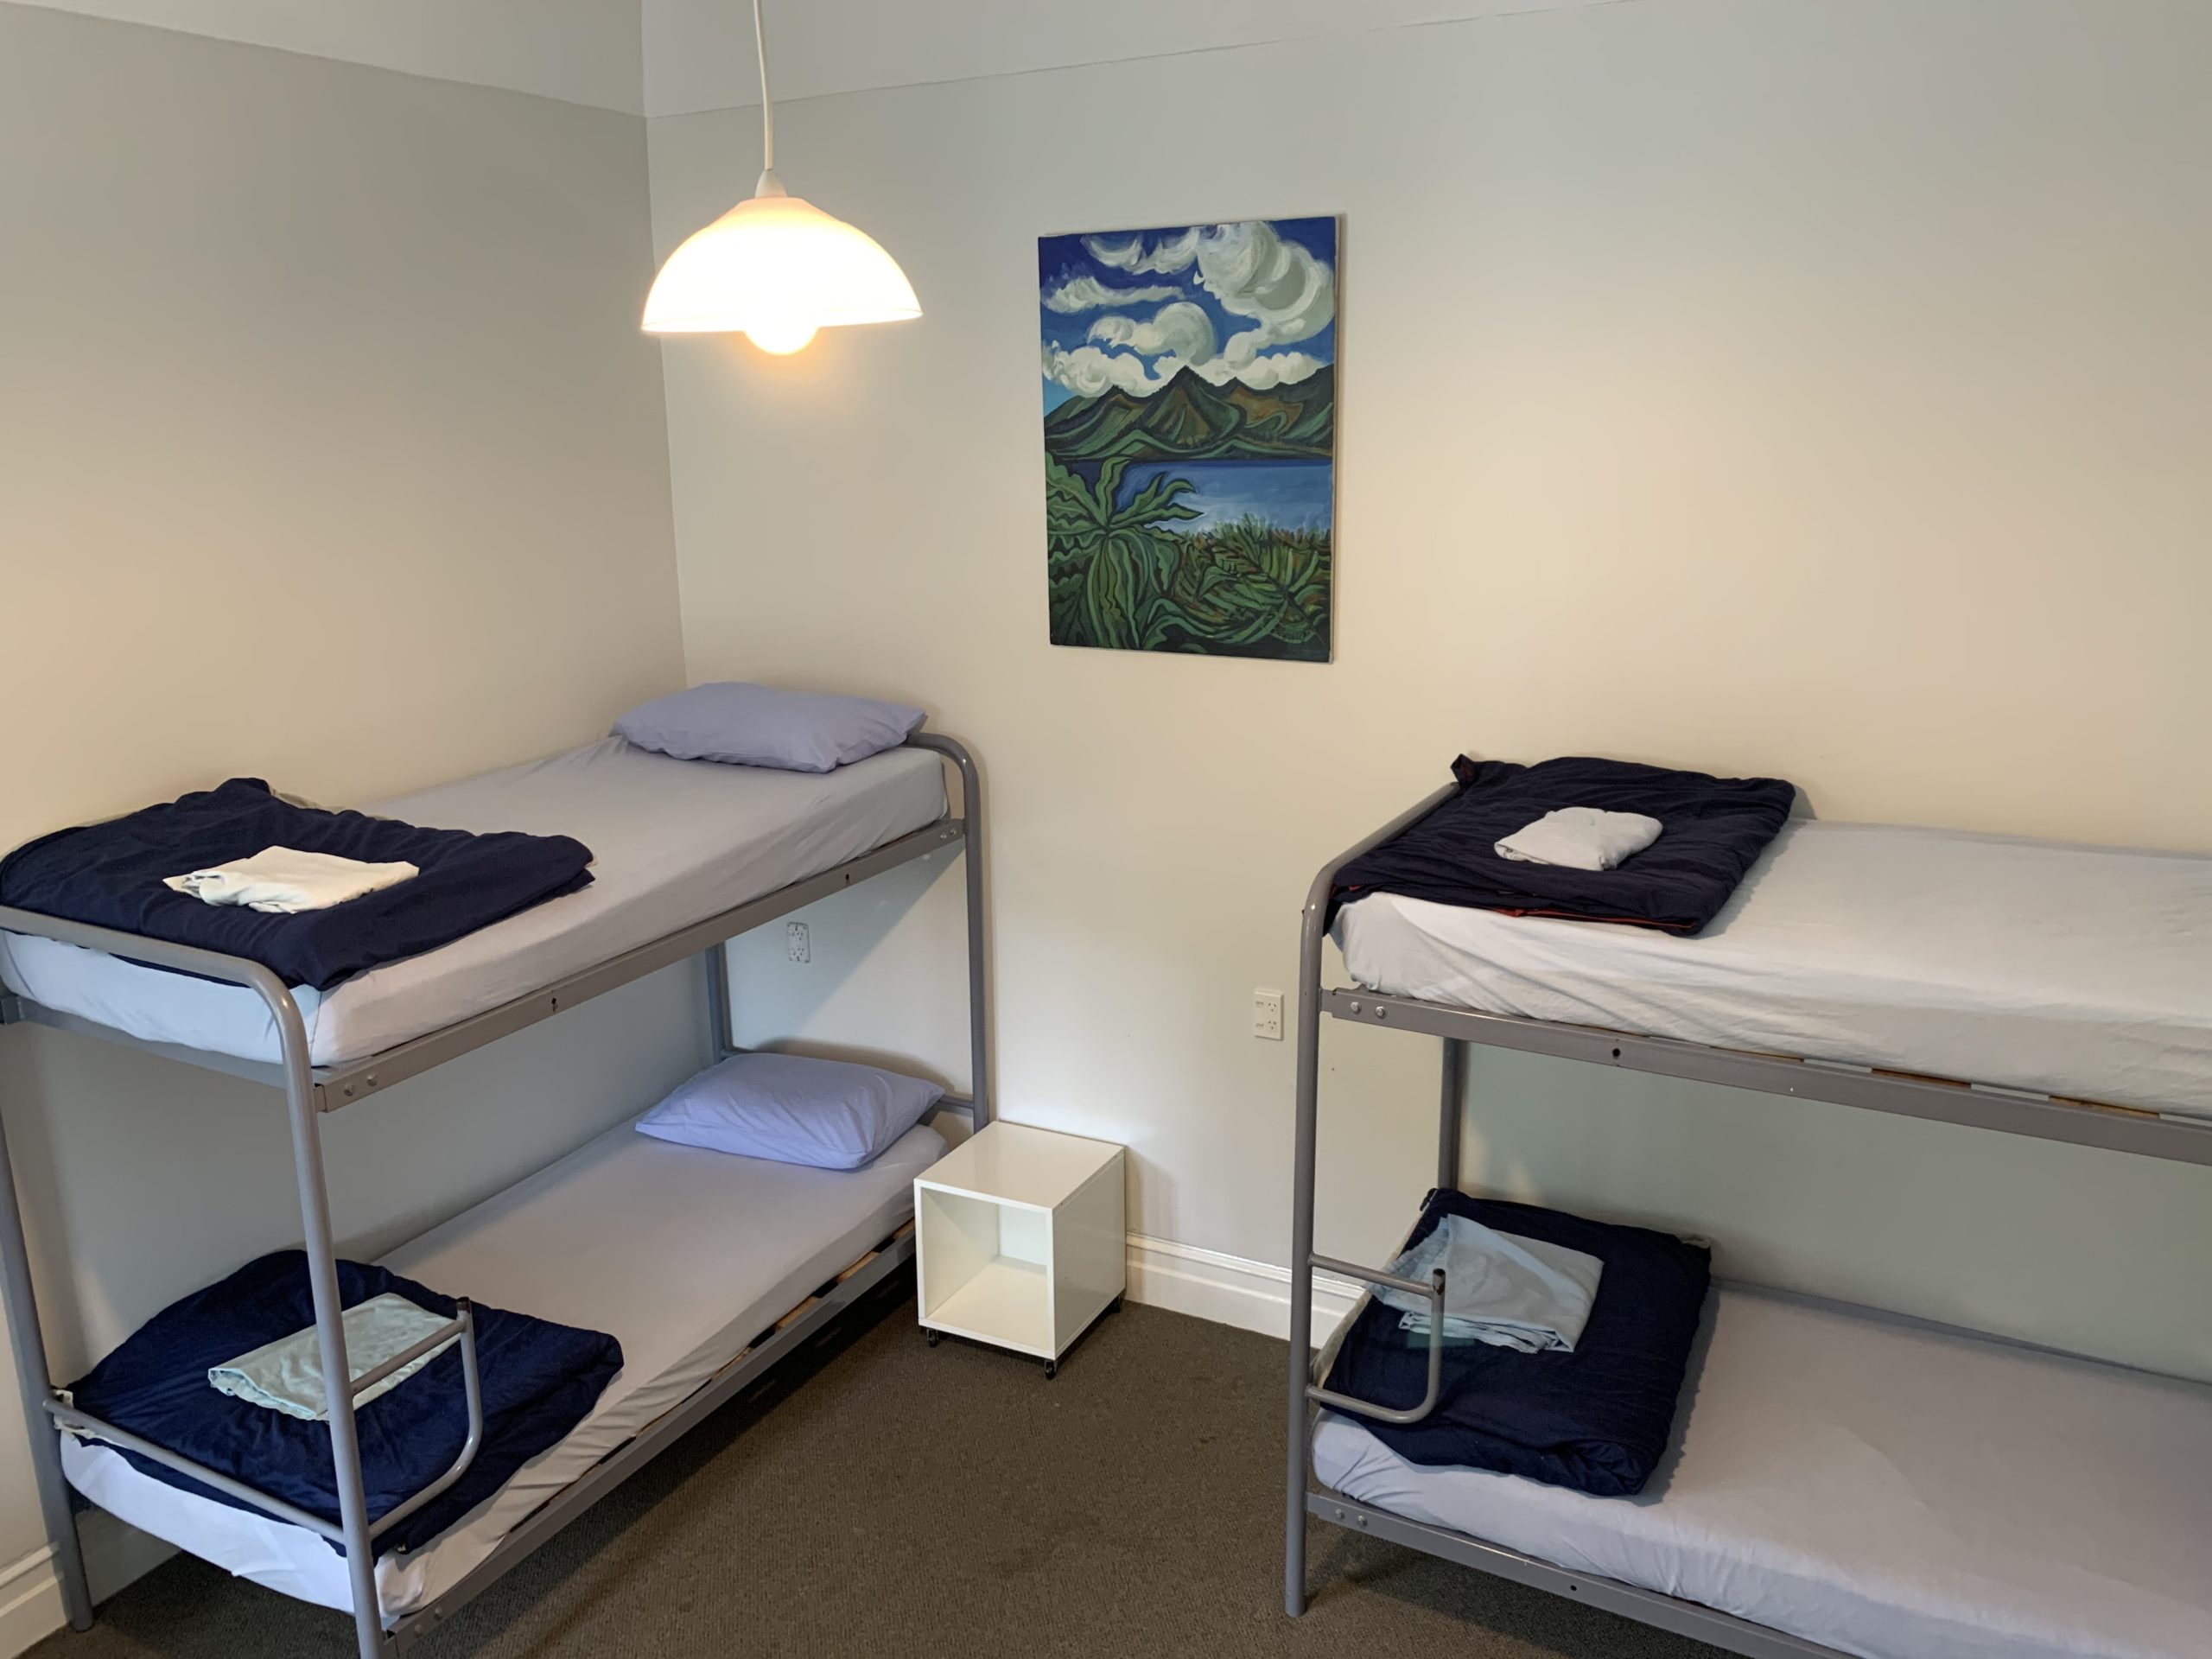 Bunk Dorms At The Villa Backpackers Lodge In Picton Marlborough NZ